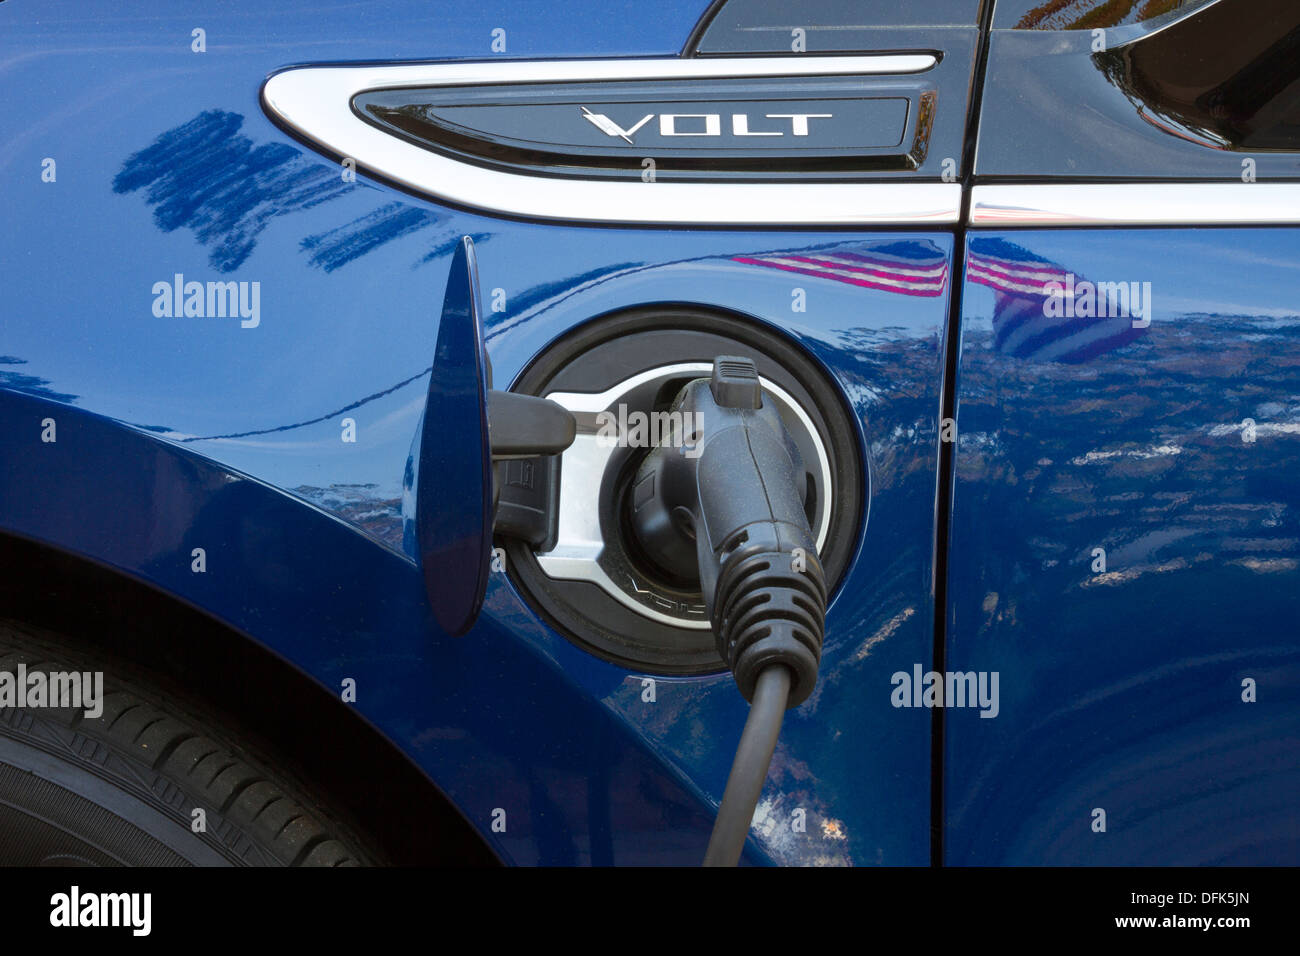 Chevrolet Volt plug-in electric car with connector plugged in and charging with reflection of American flag on vehicle Stock Photo